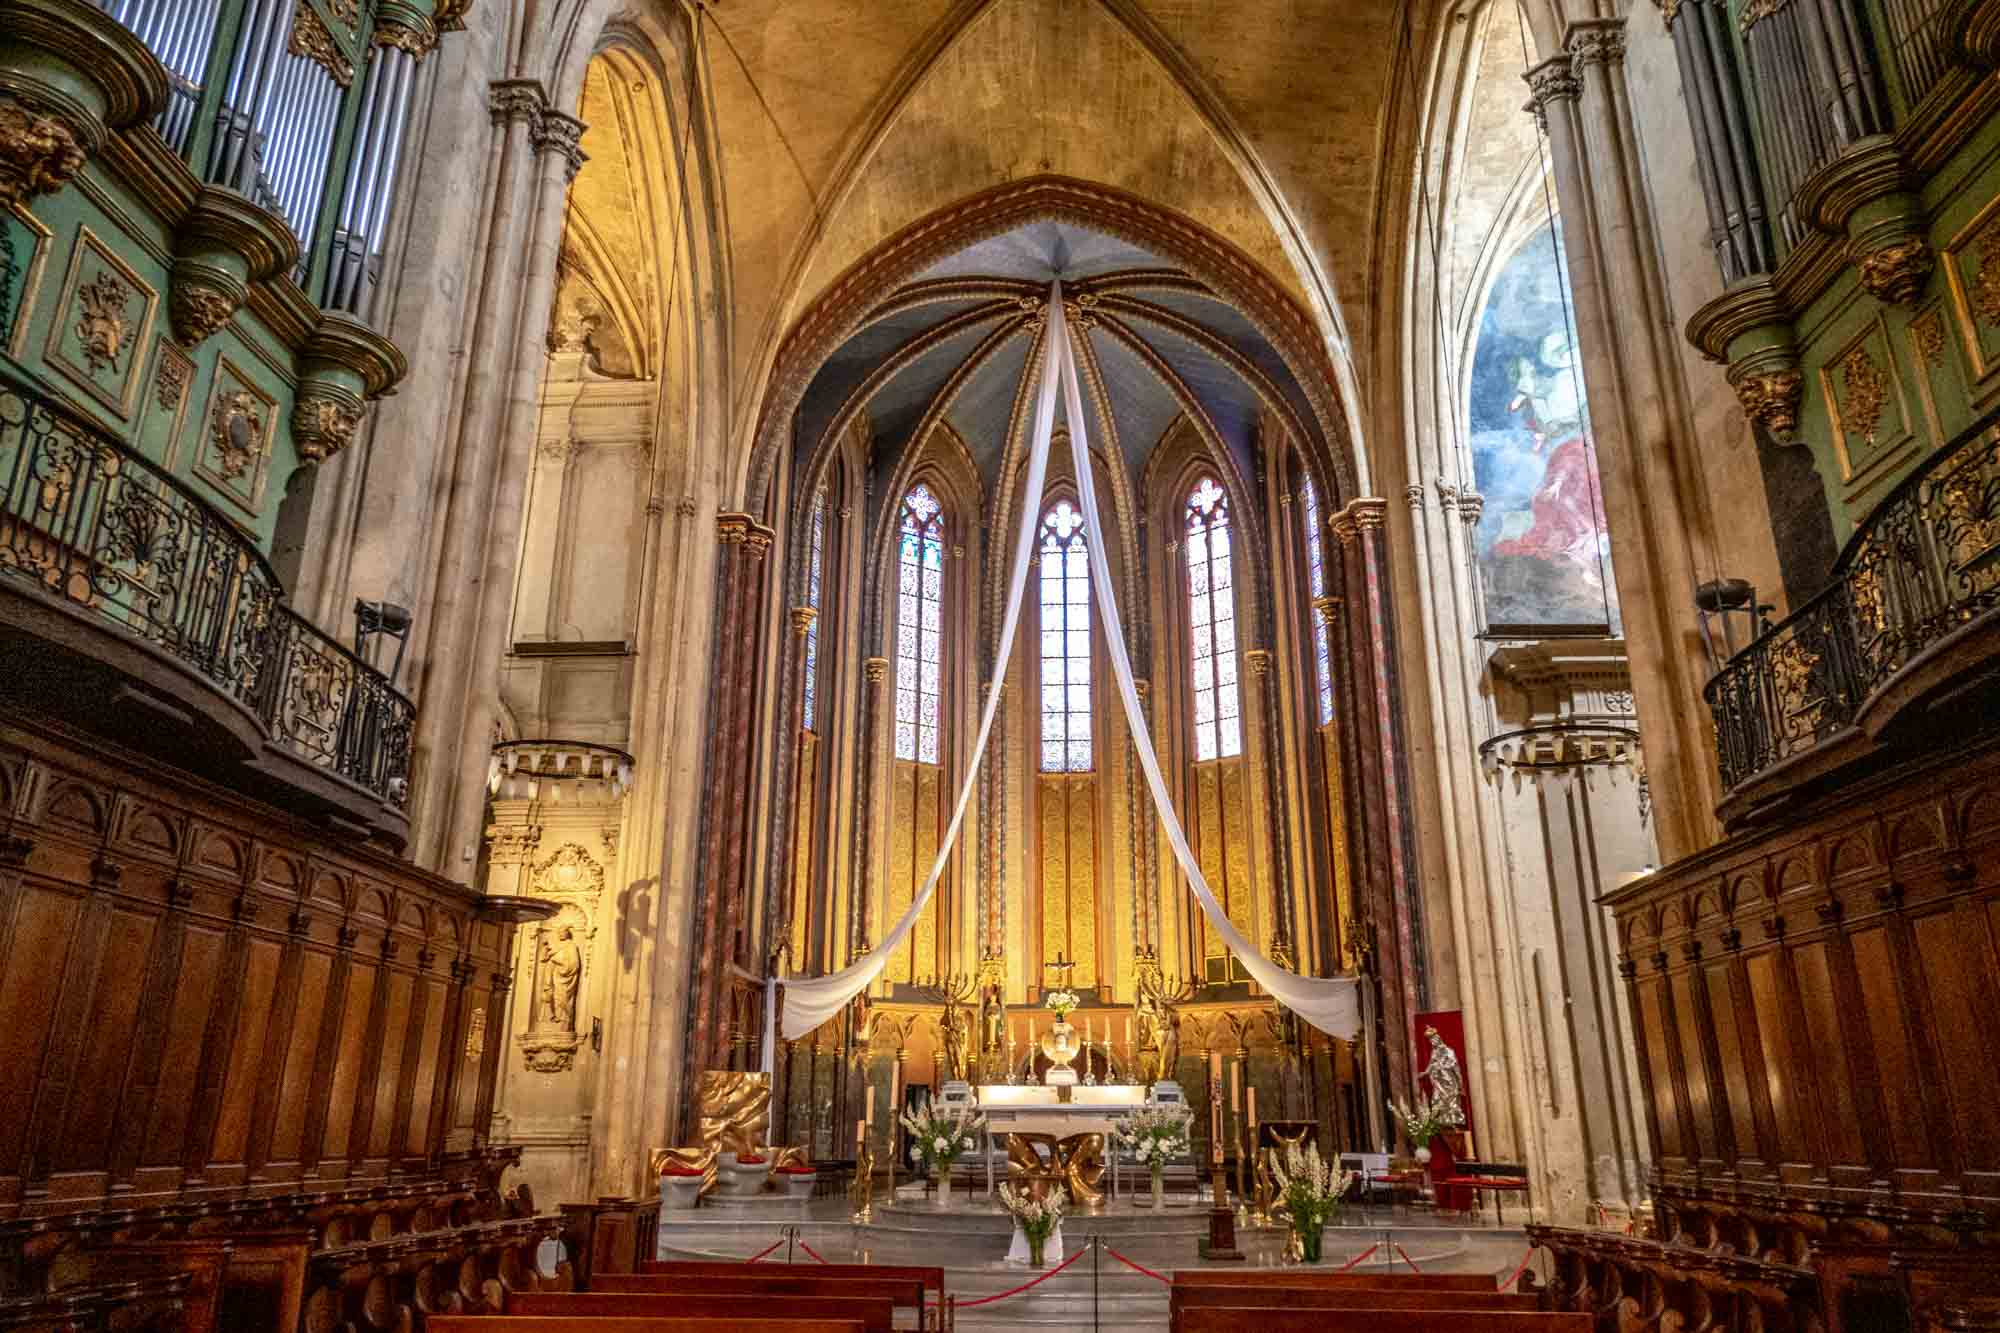 Interior of a cathedral sanctuary with a pipe organ and vaulted ceiling.